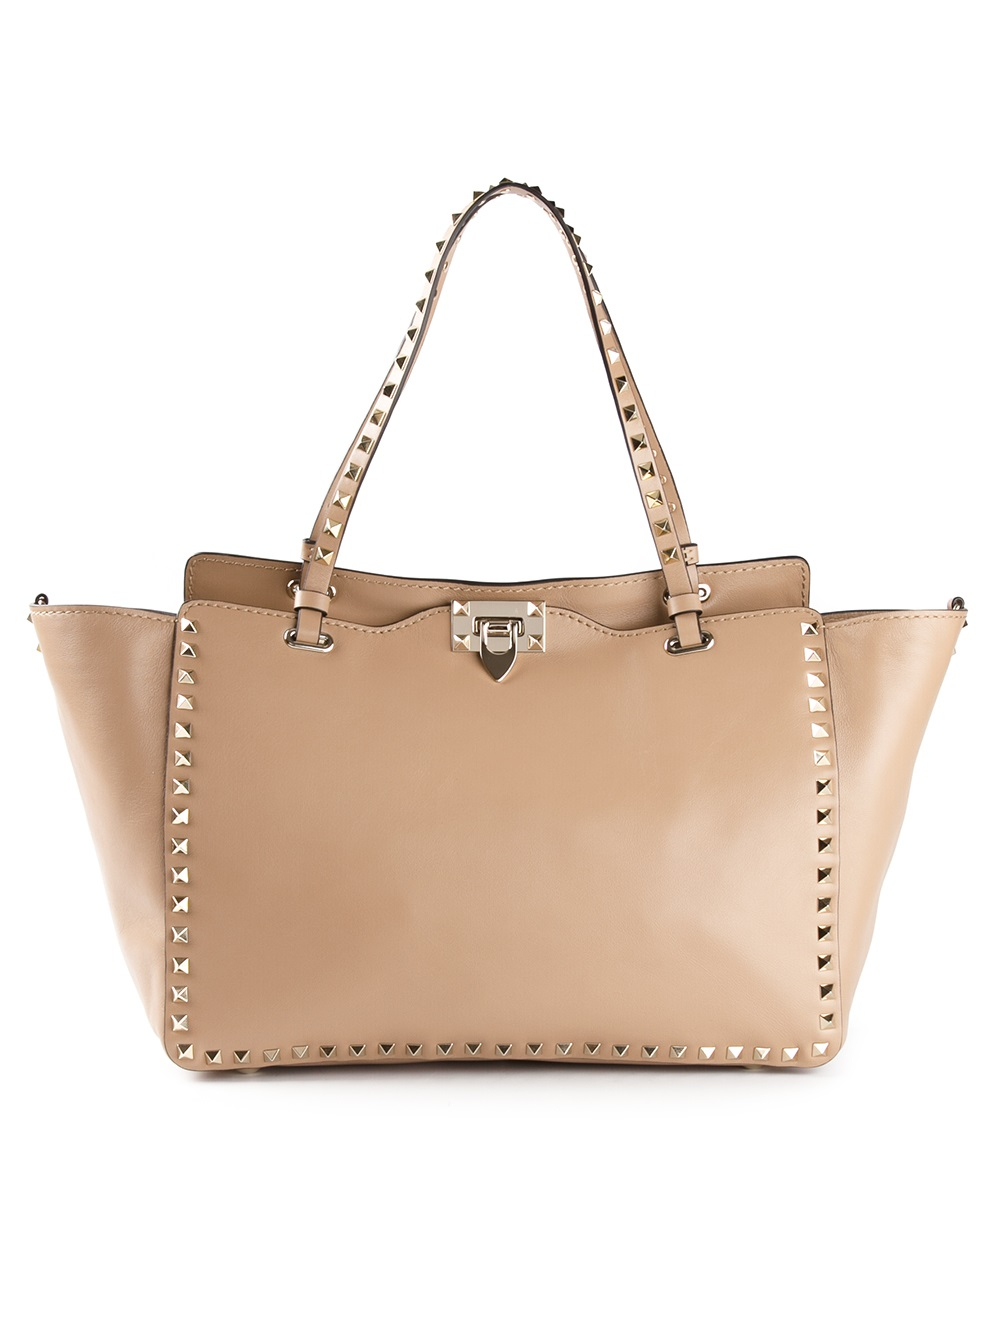 Lyst - Valentino Rockstud Large Trapeze Tote in Natural